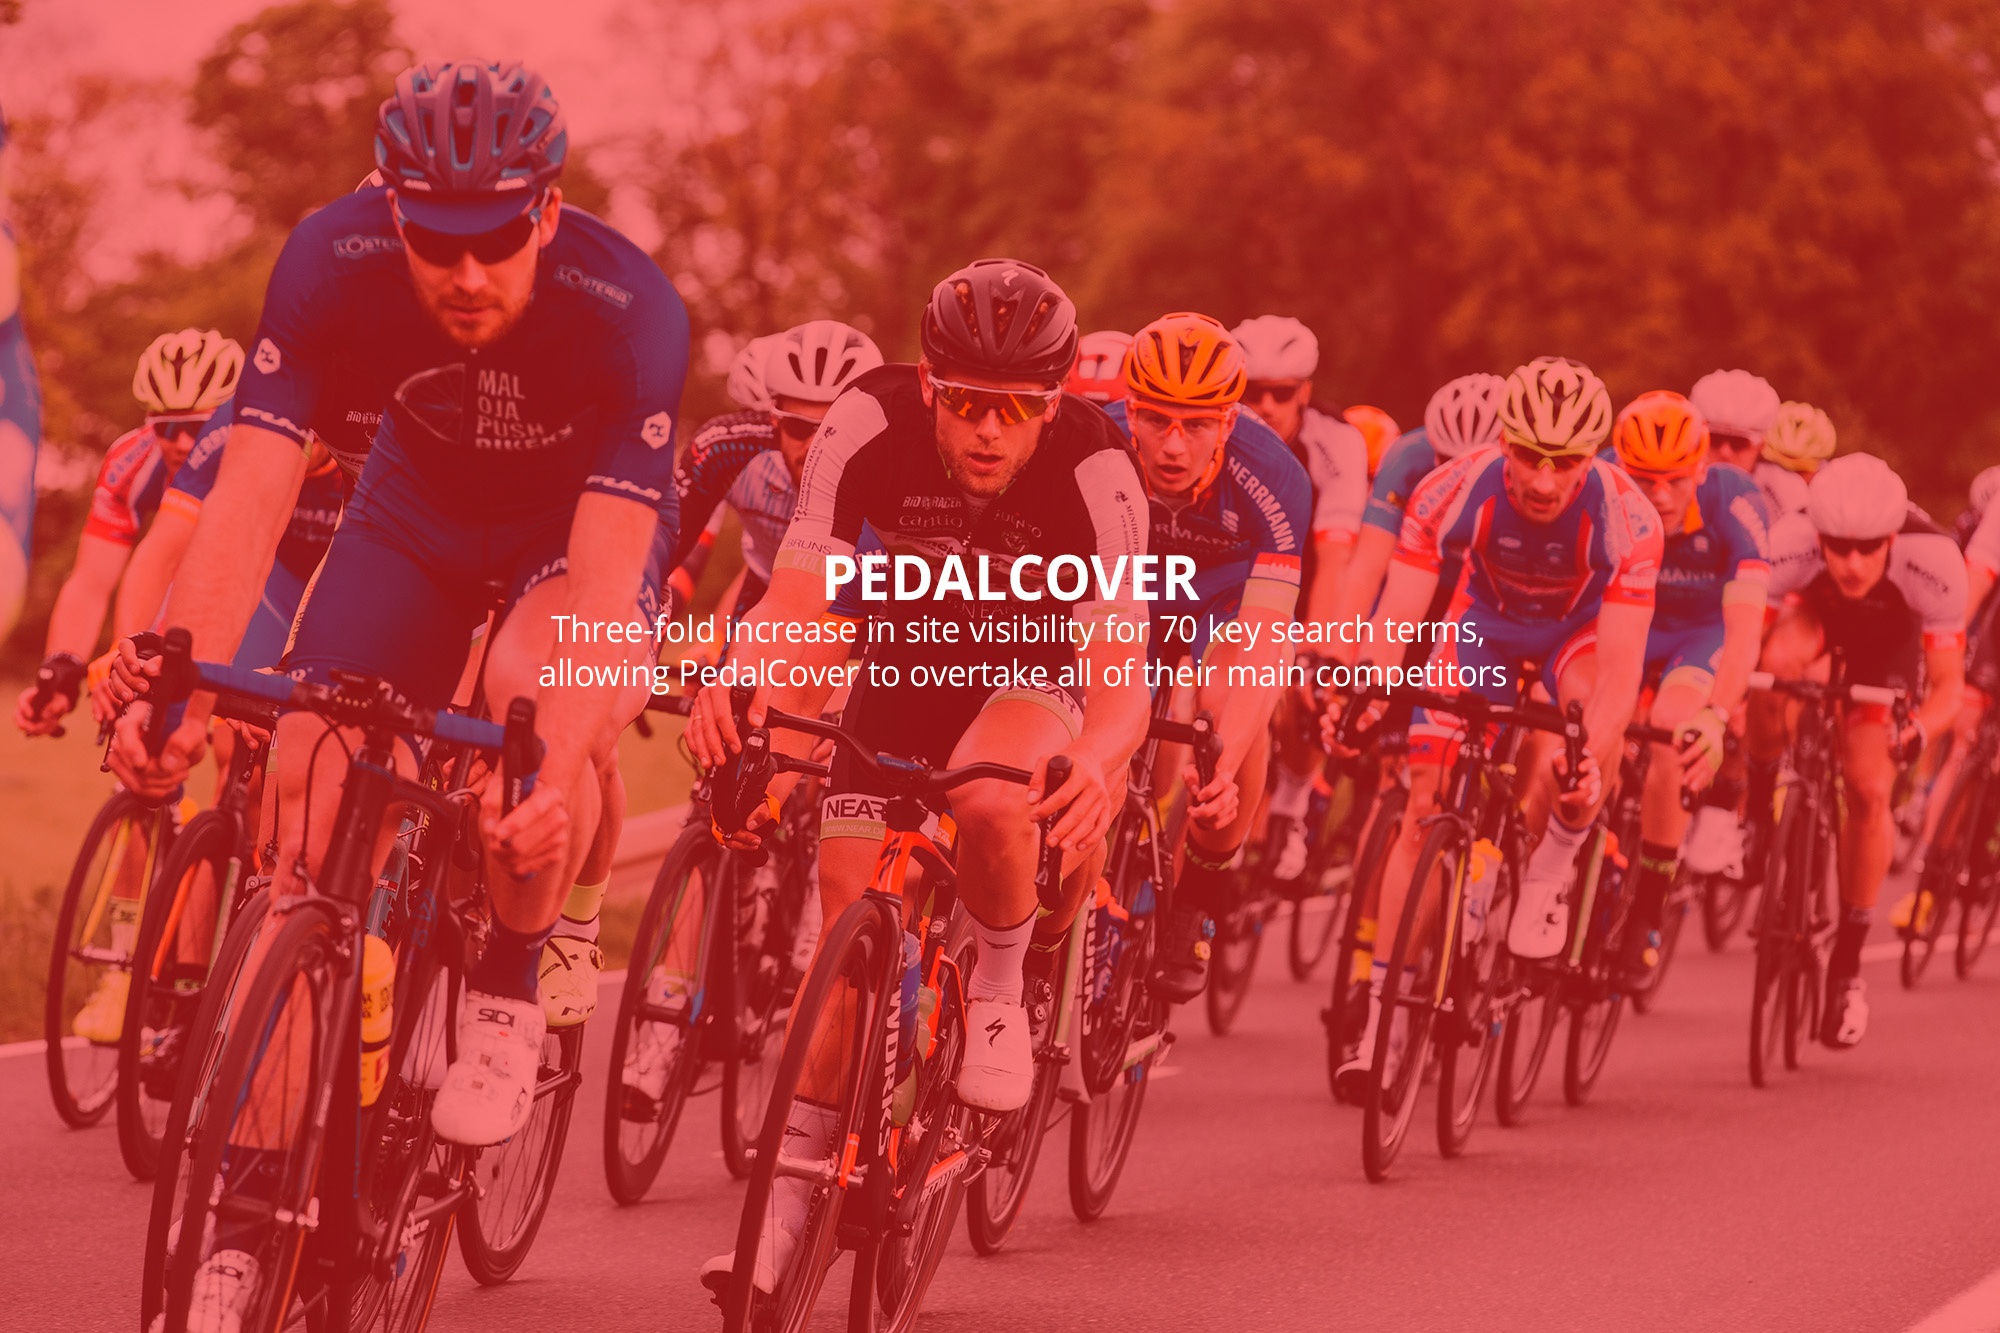 PedalCover hree-fold increase in site visibility for 70 key search terms, allowing PedalCover to overtake all of their main competitors